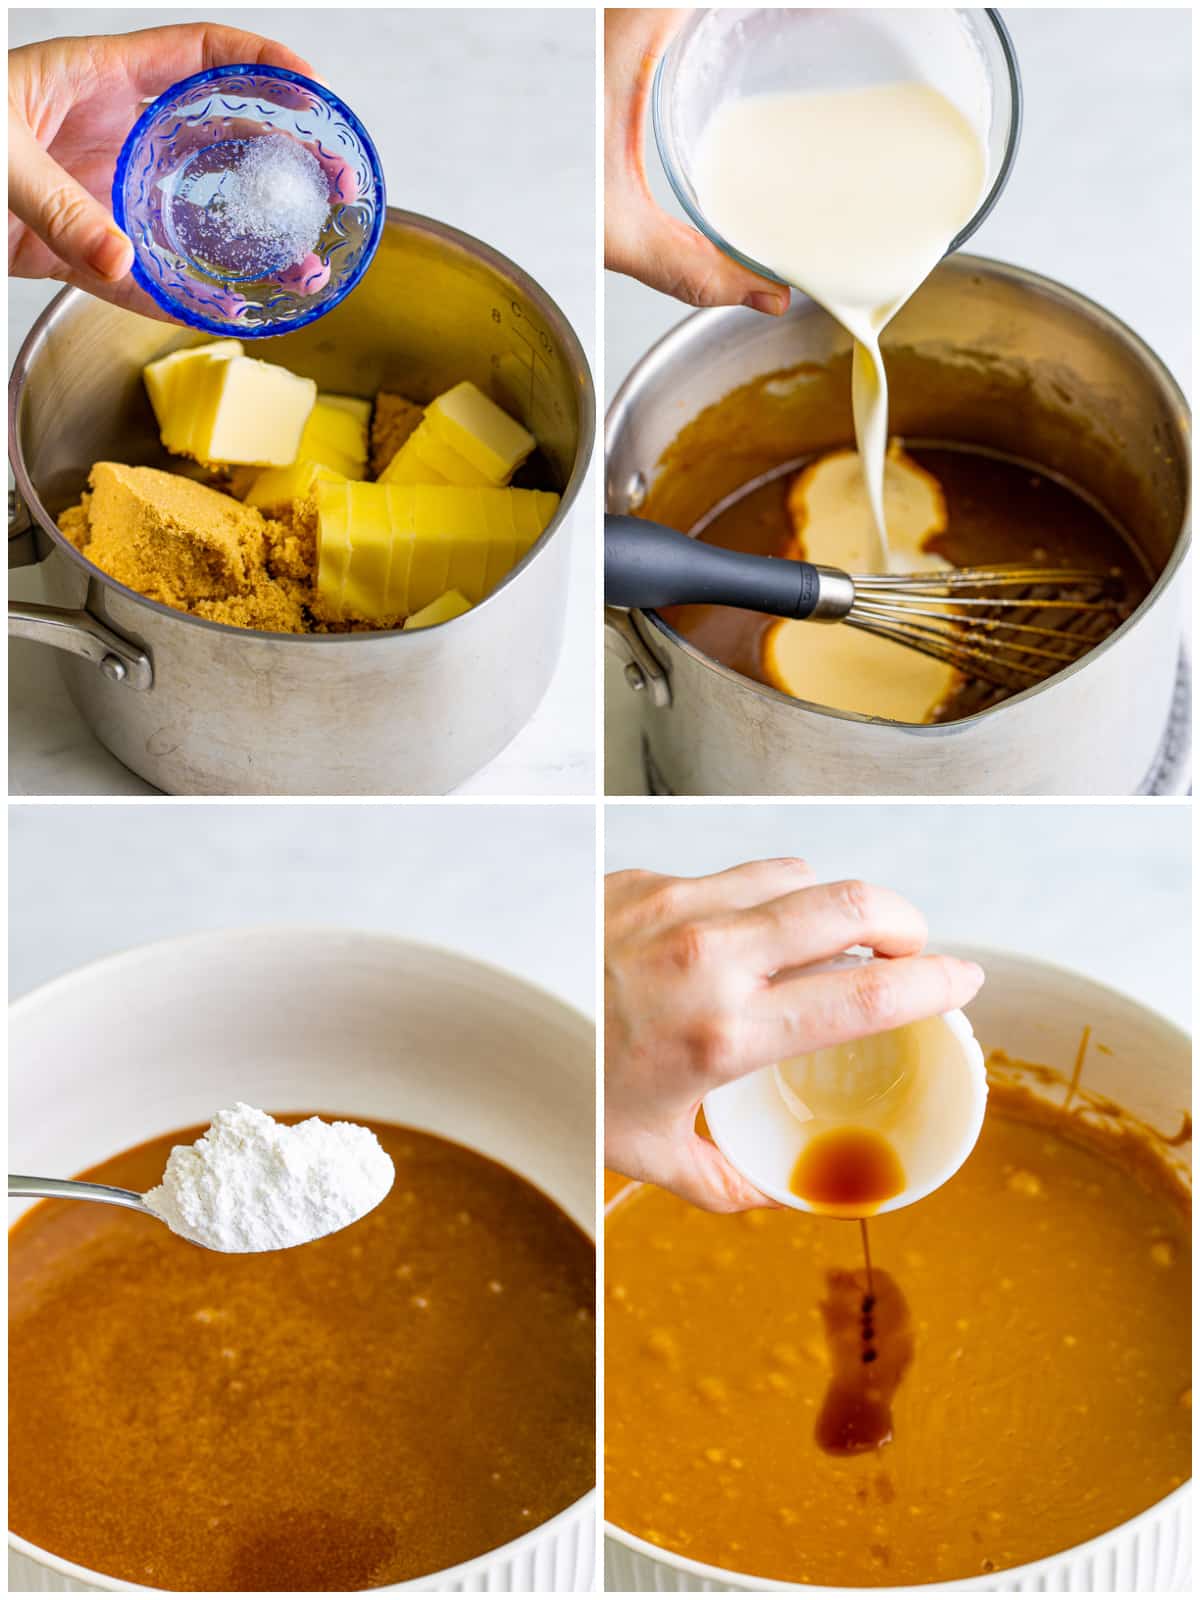 Step by step photos on how to make the caramel frosting.